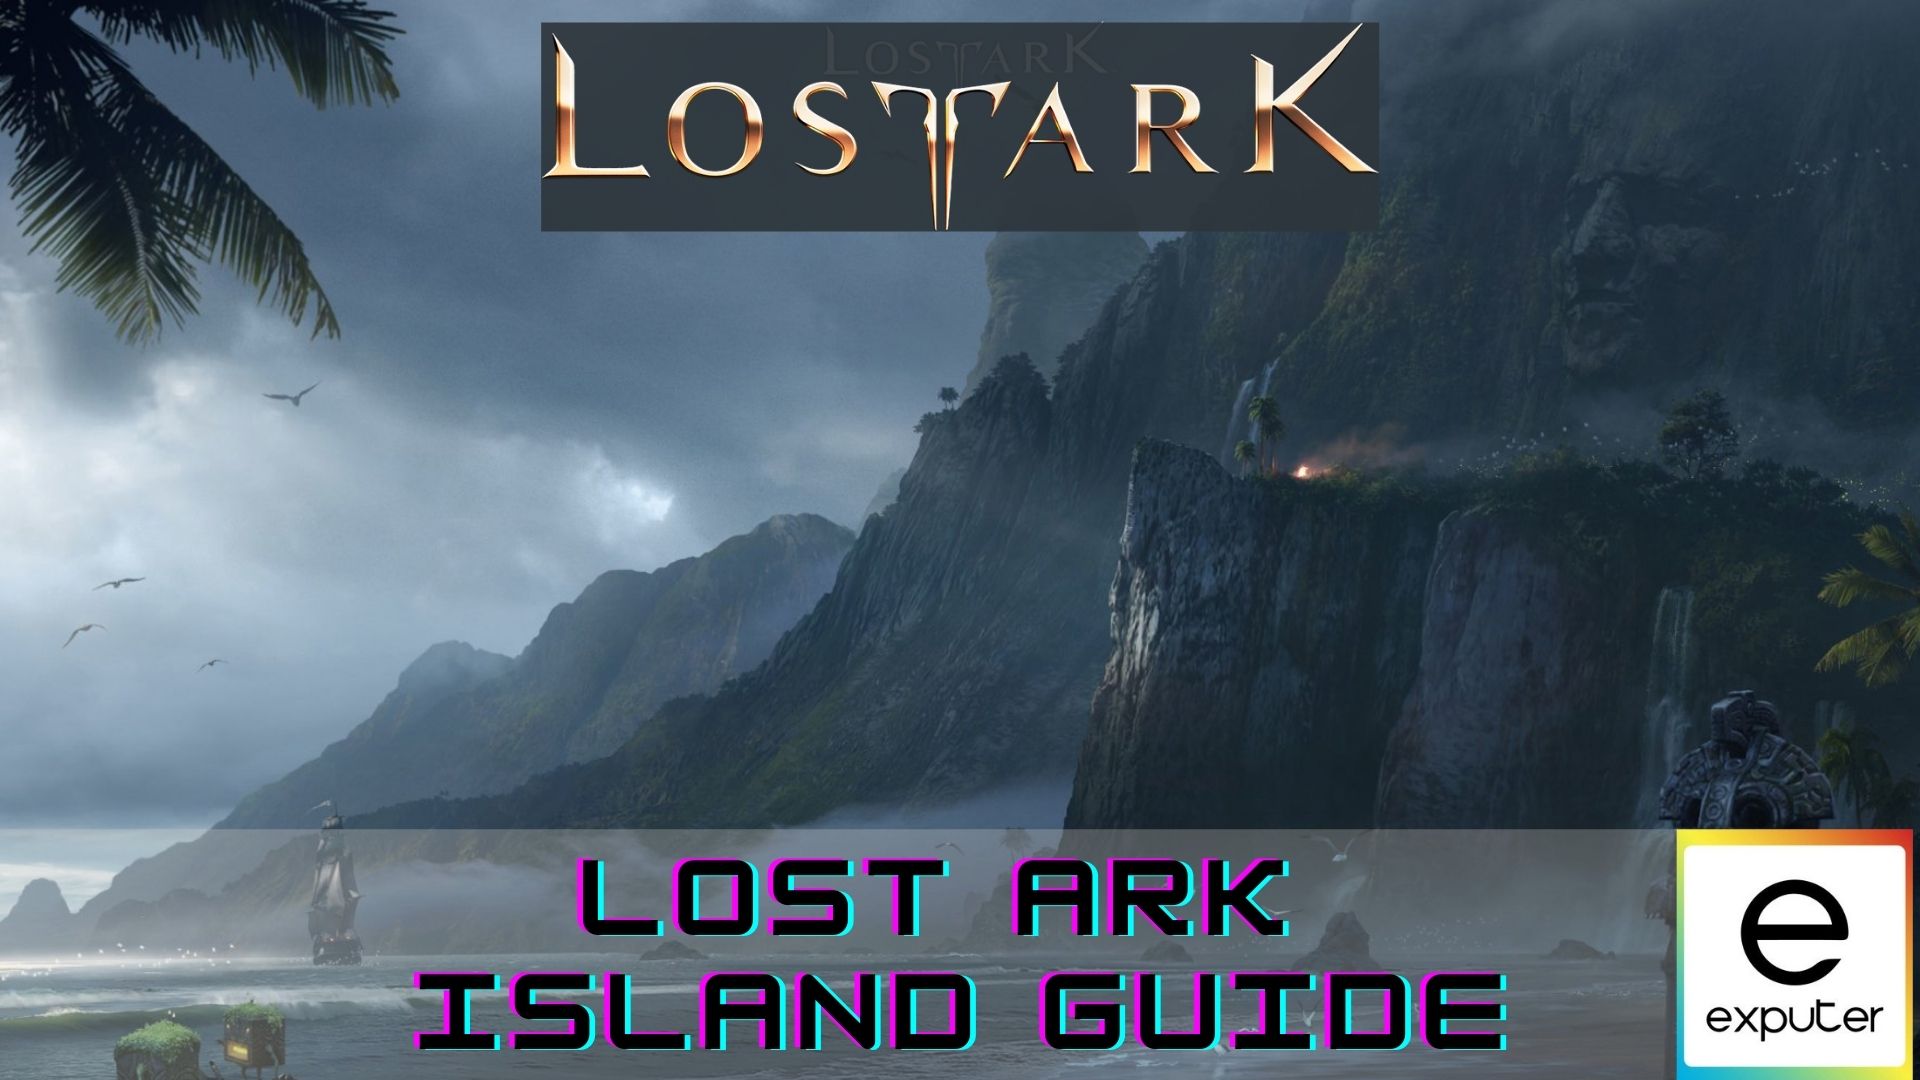 Lost Ark Island Guides